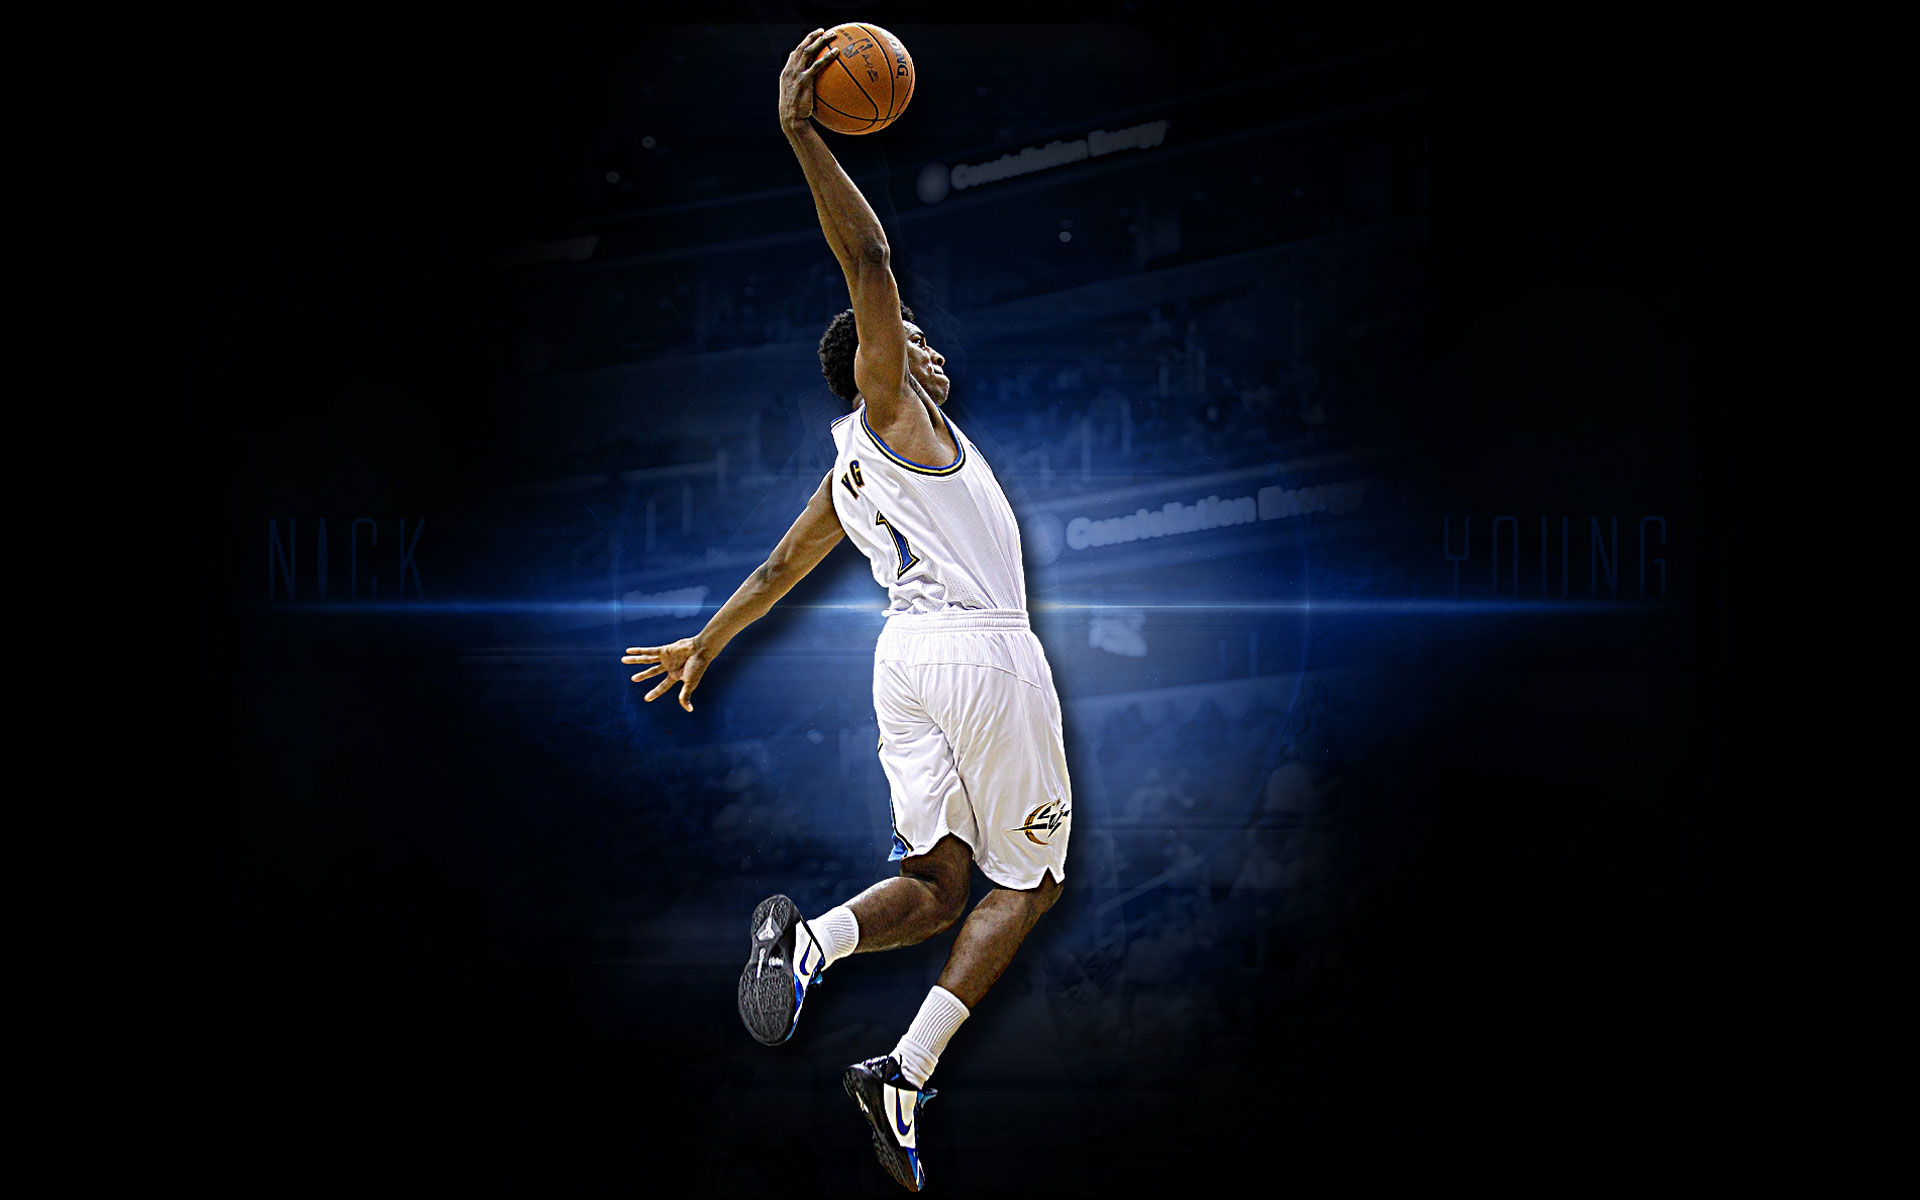 Basketball Players 2217 Hd Wallpapers in Sports - Imagesci.com